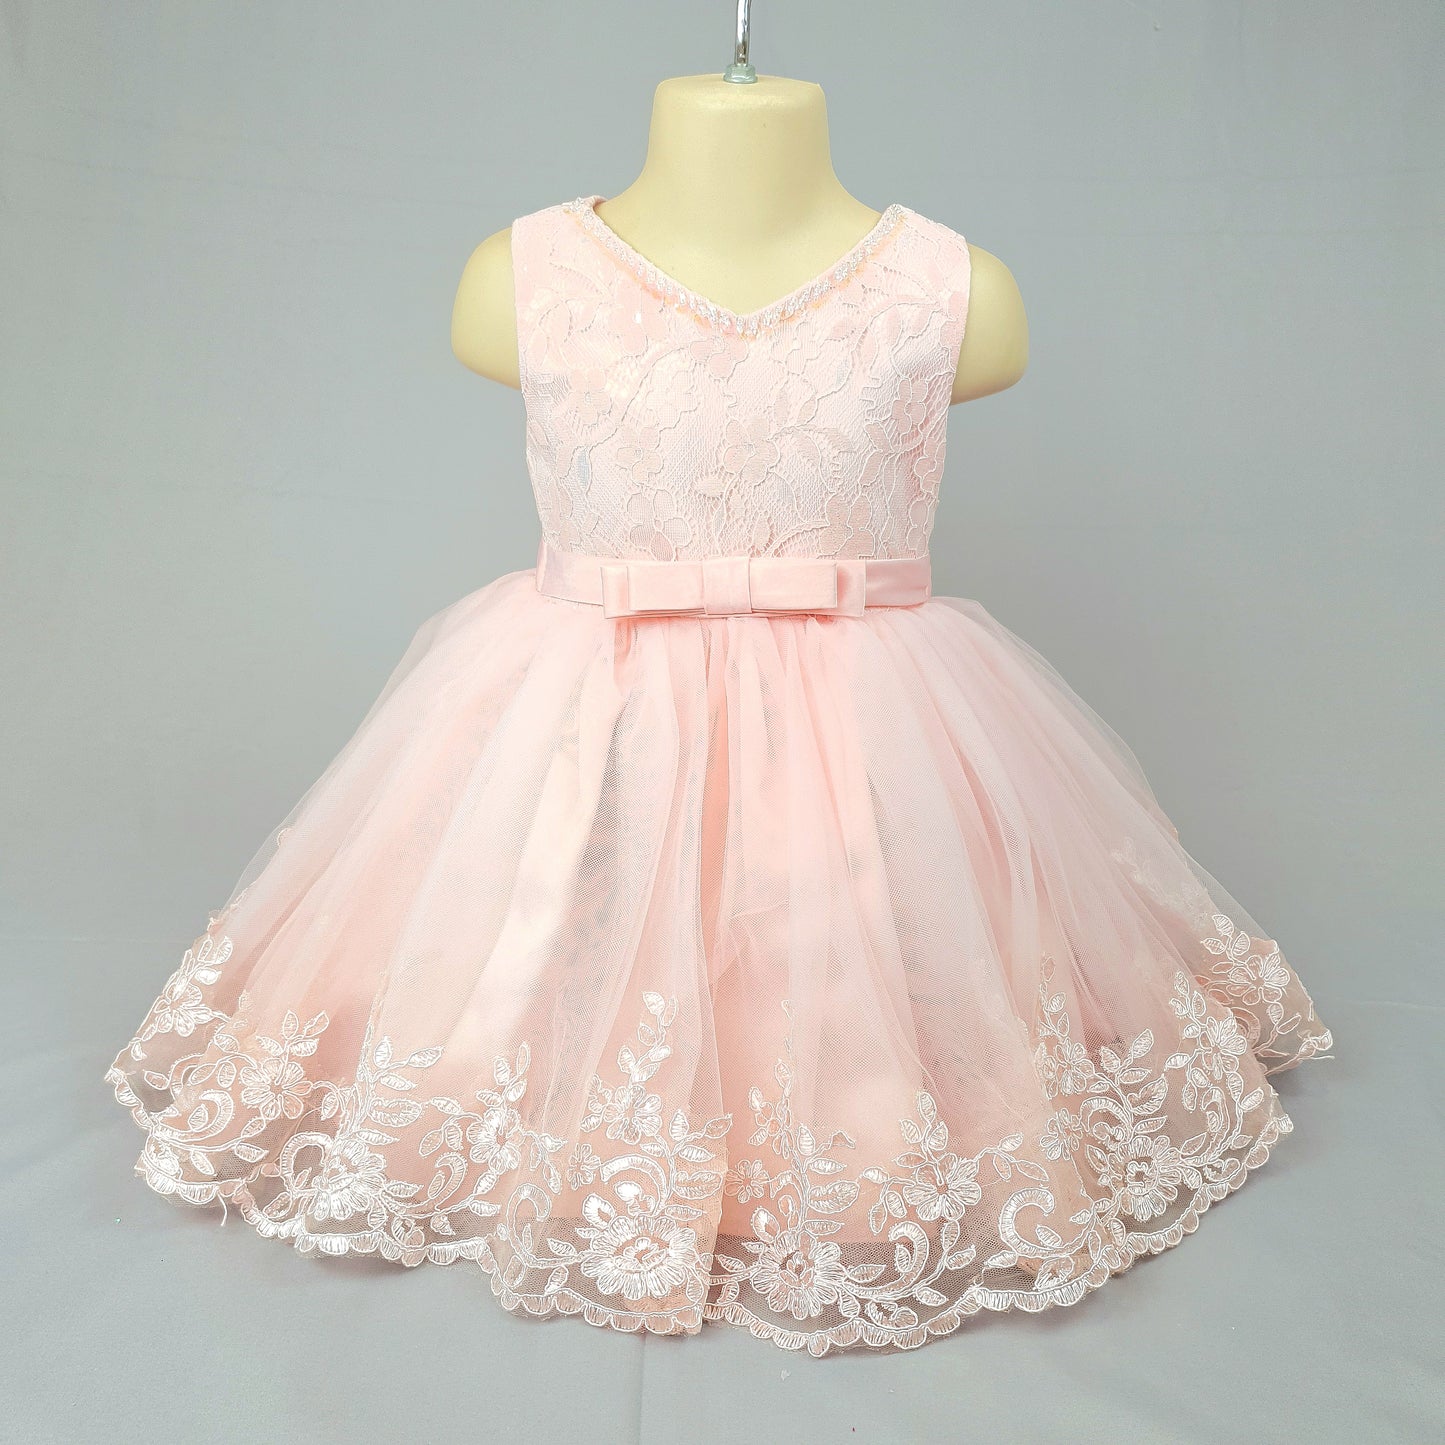 Floral lace and appliques with big bow peach dress